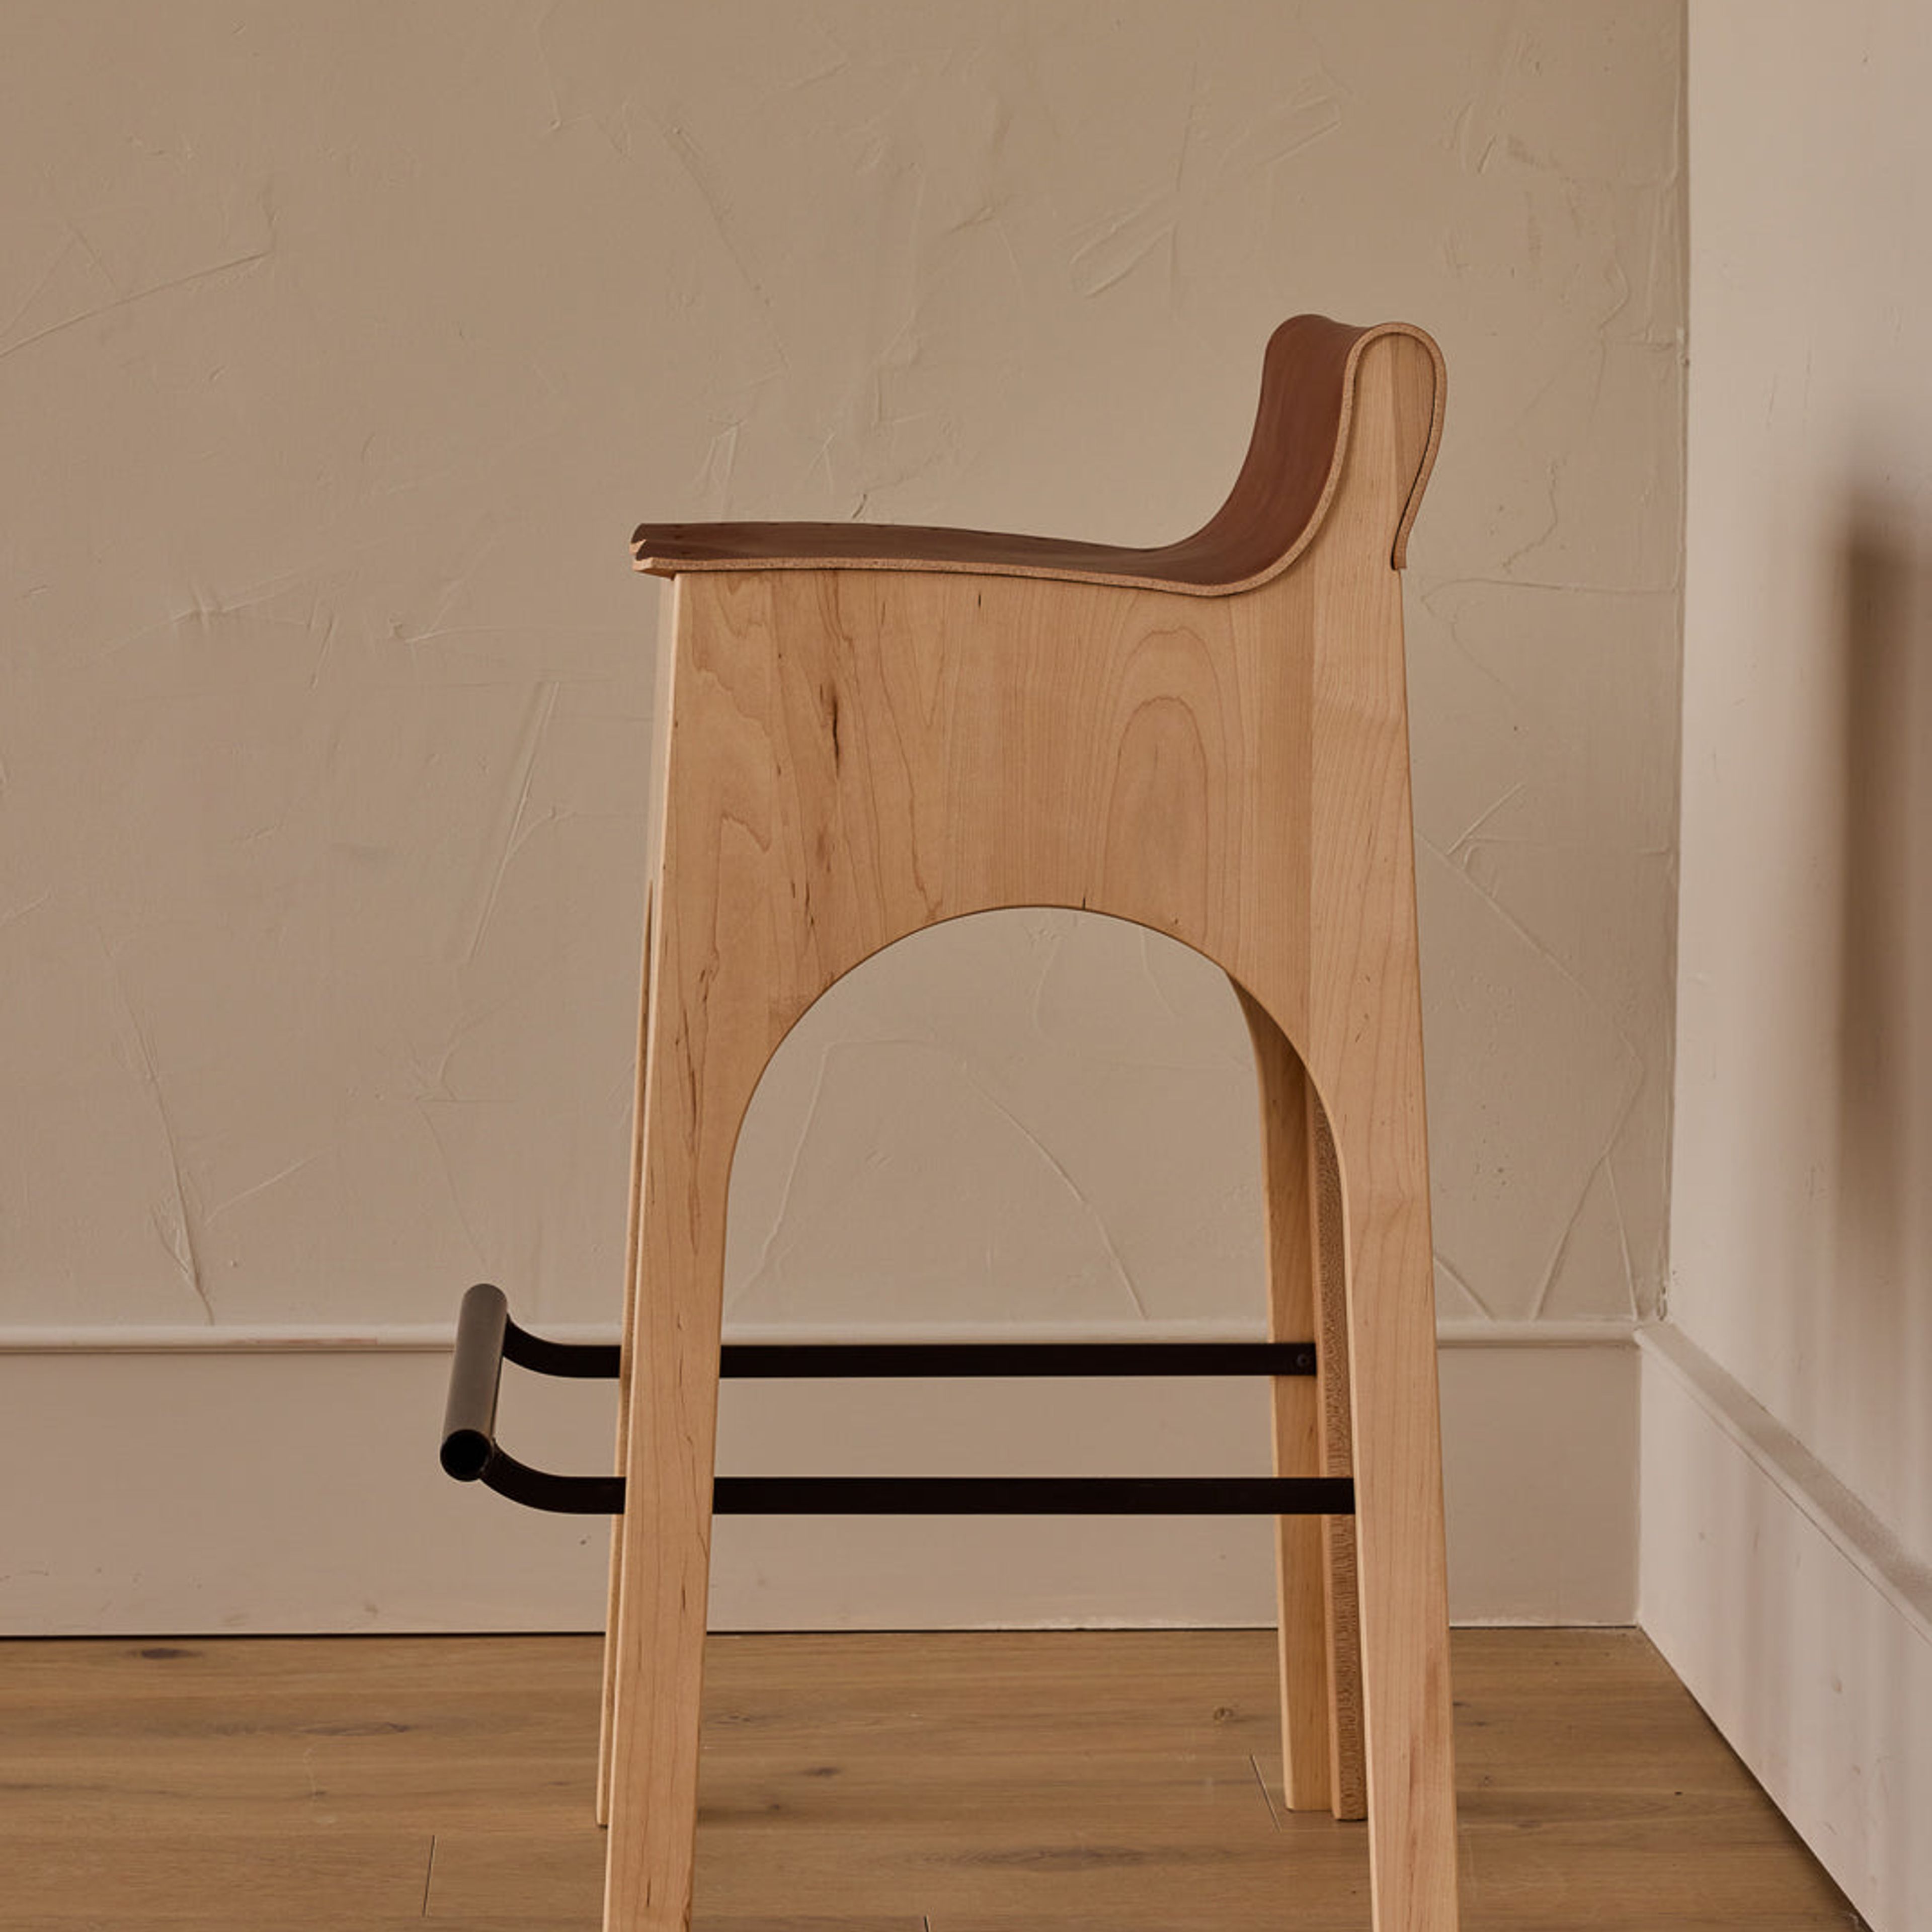 Jack Leather and Wood Stool - Tan